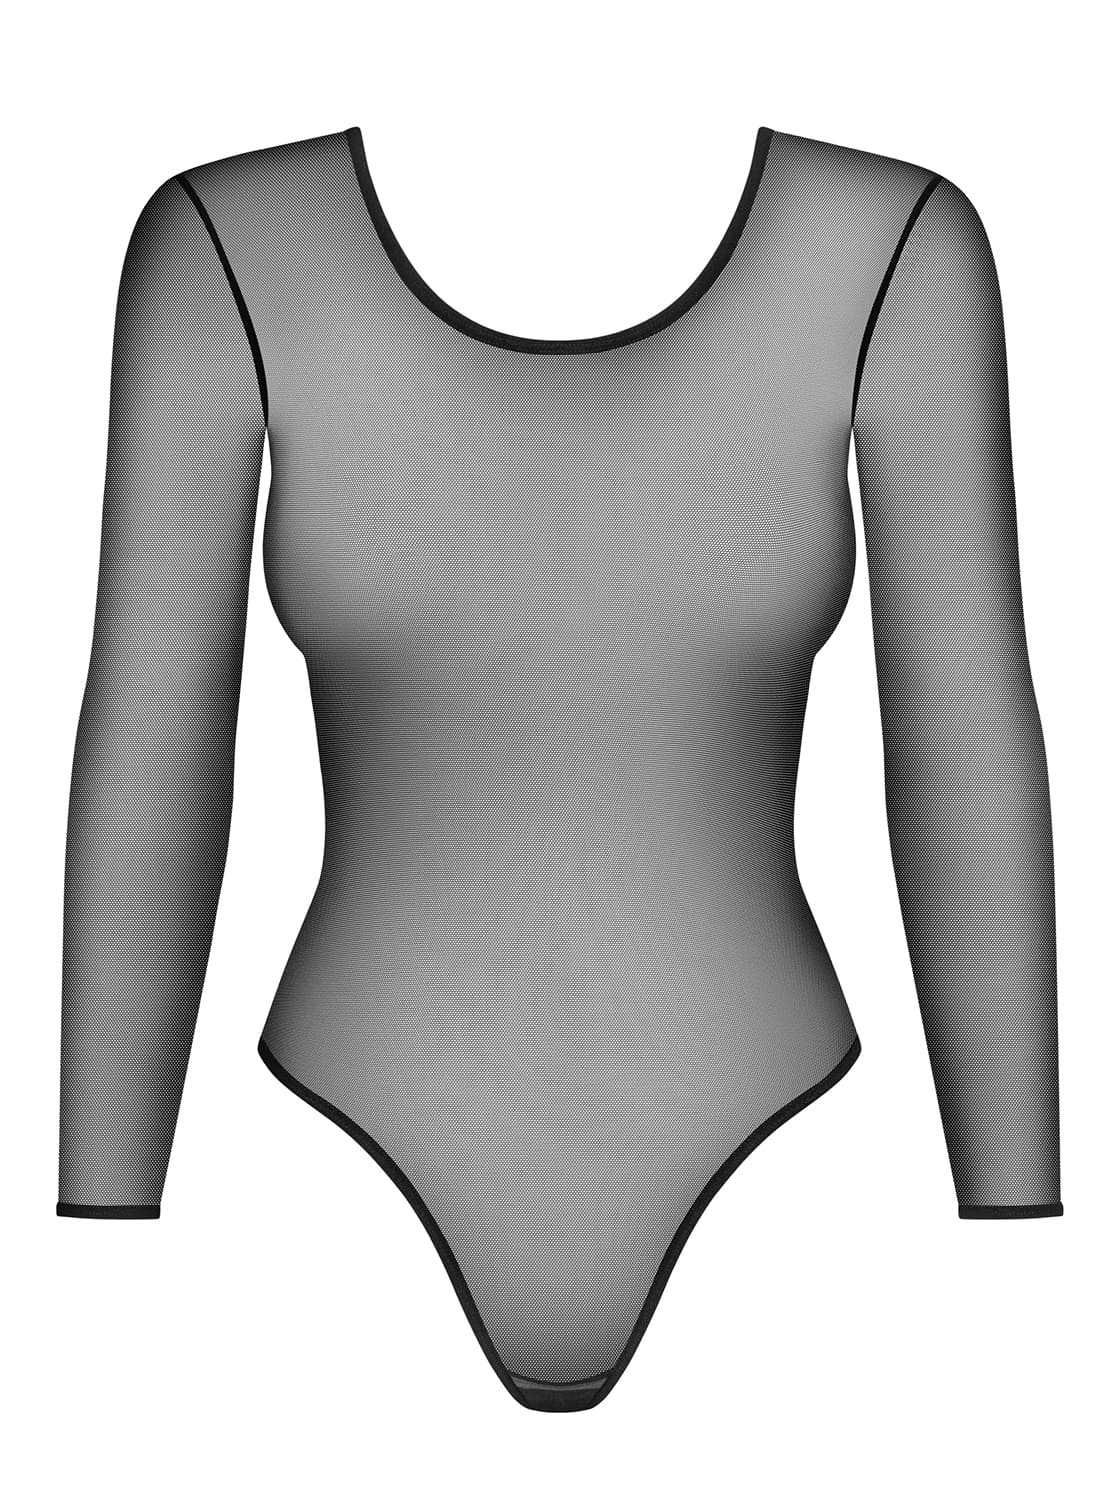 Black bodysuit made of transparent mesh material with long sleeves